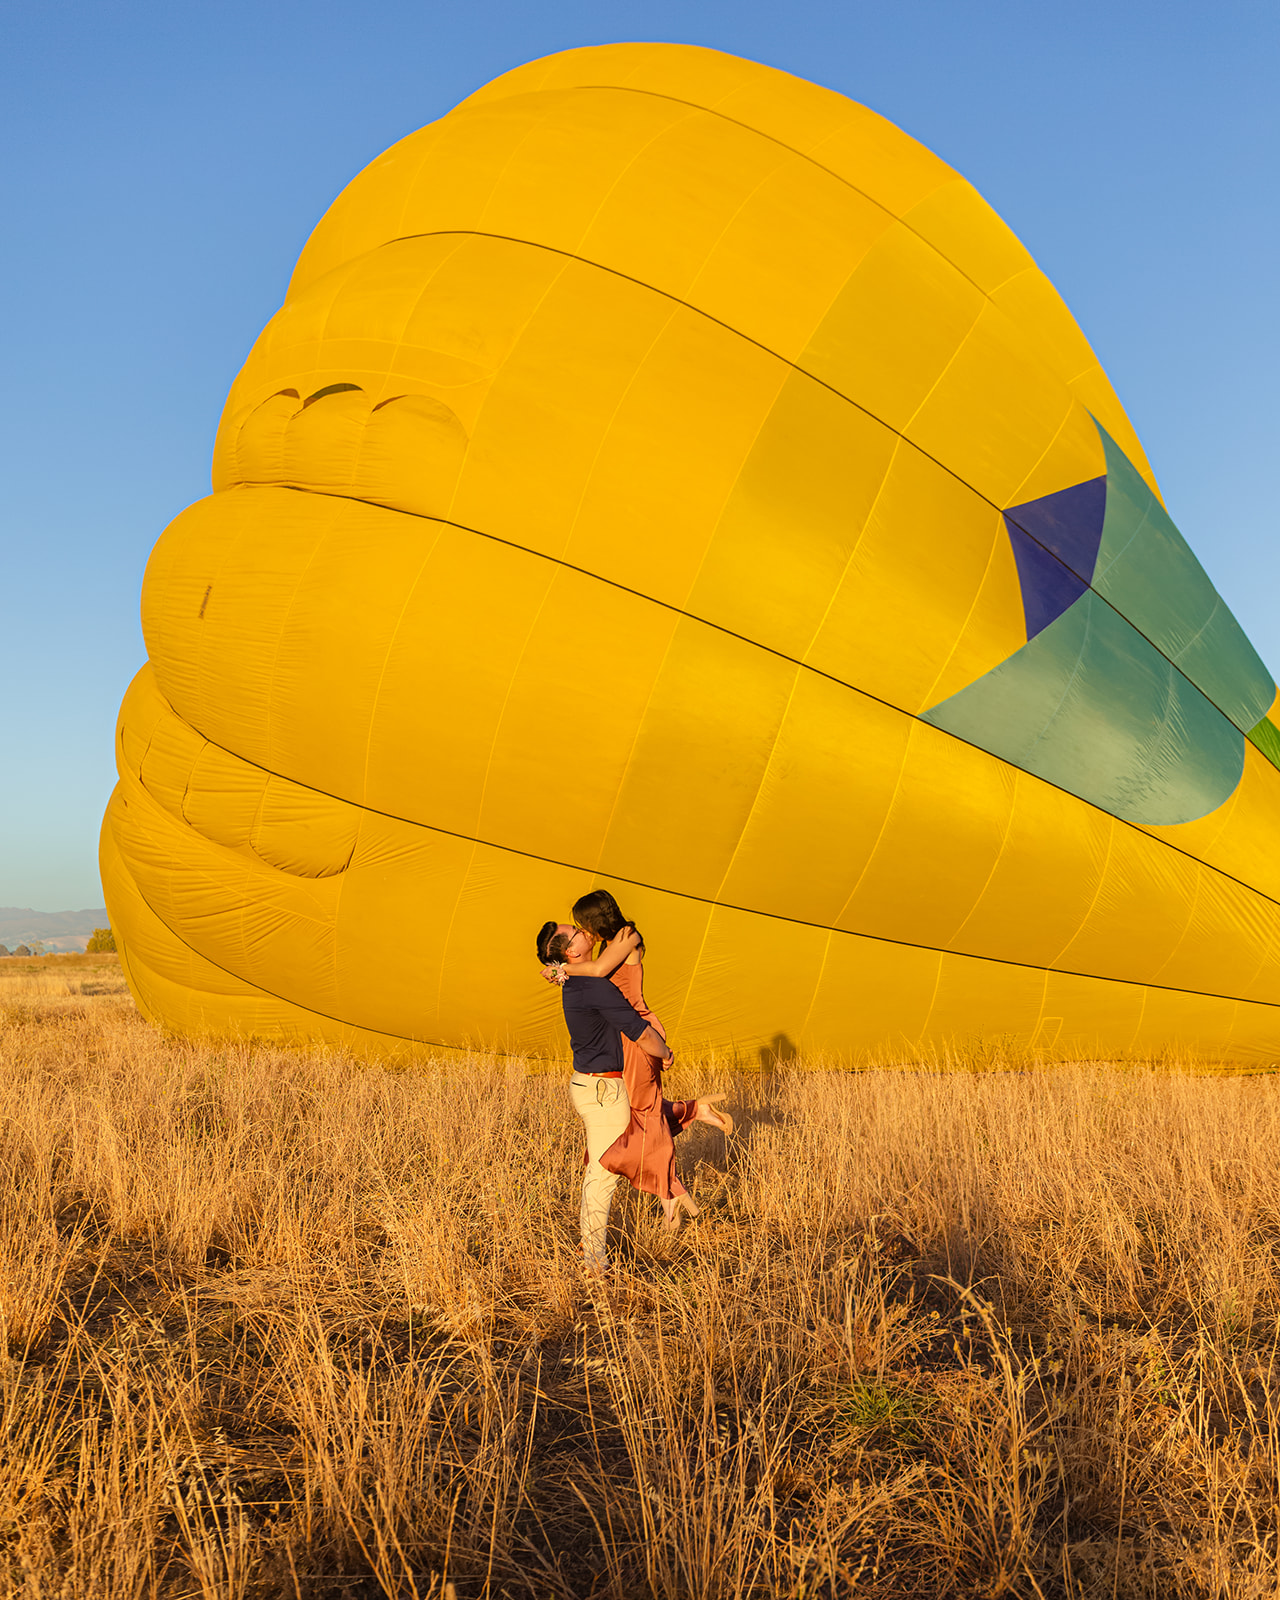 nonbinary person lifting their fiancée in front of a yellow hot air balloon